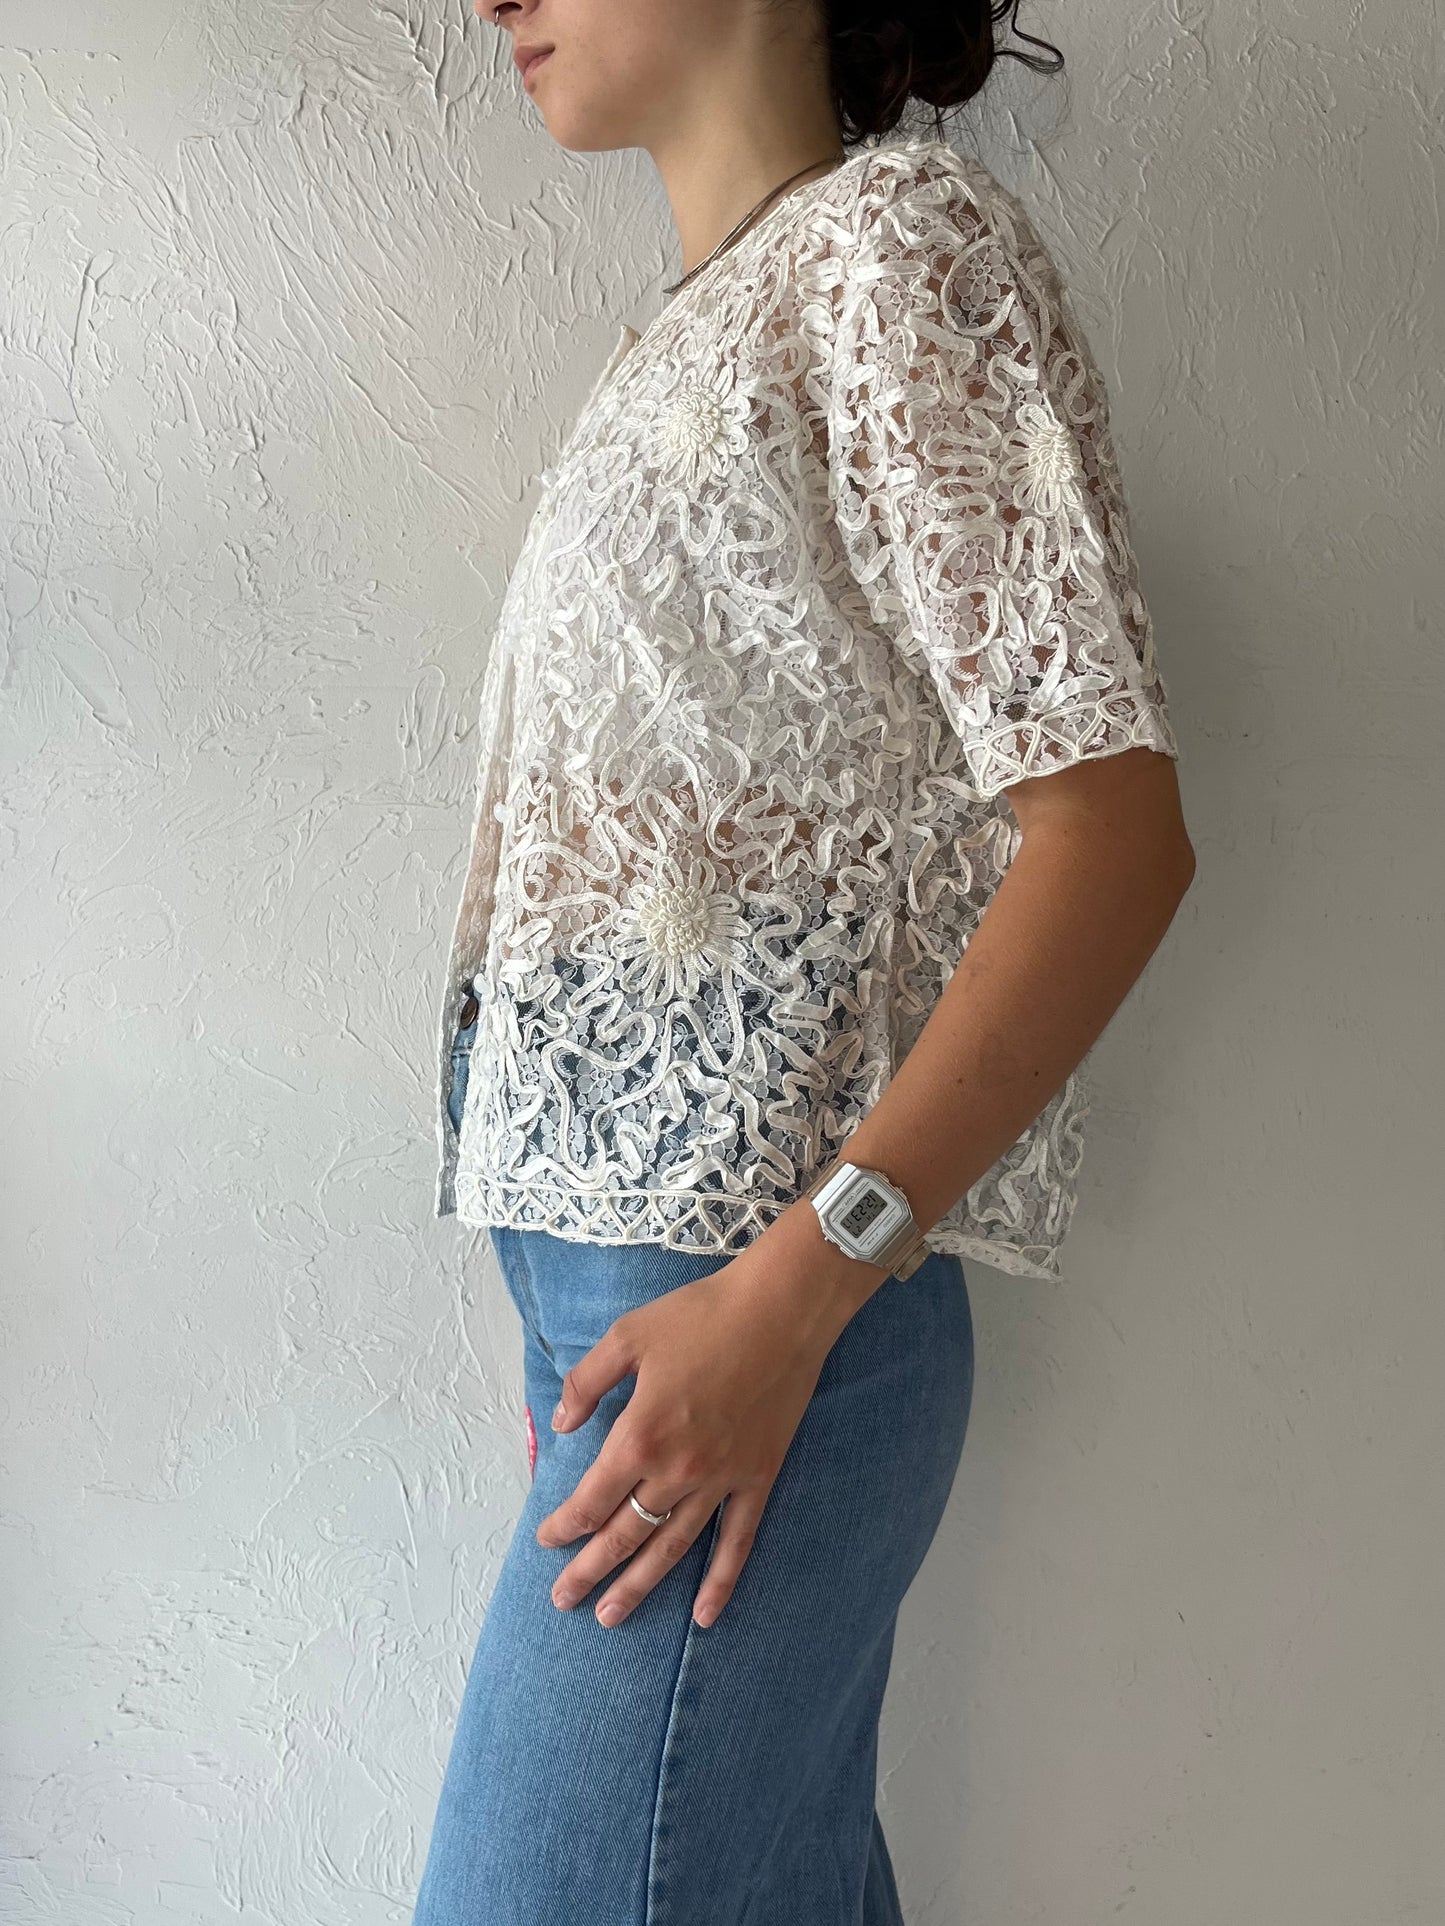 Y2K 'Yalenti' White Rayon Lace Short Sleeve Cardigan Top / Small